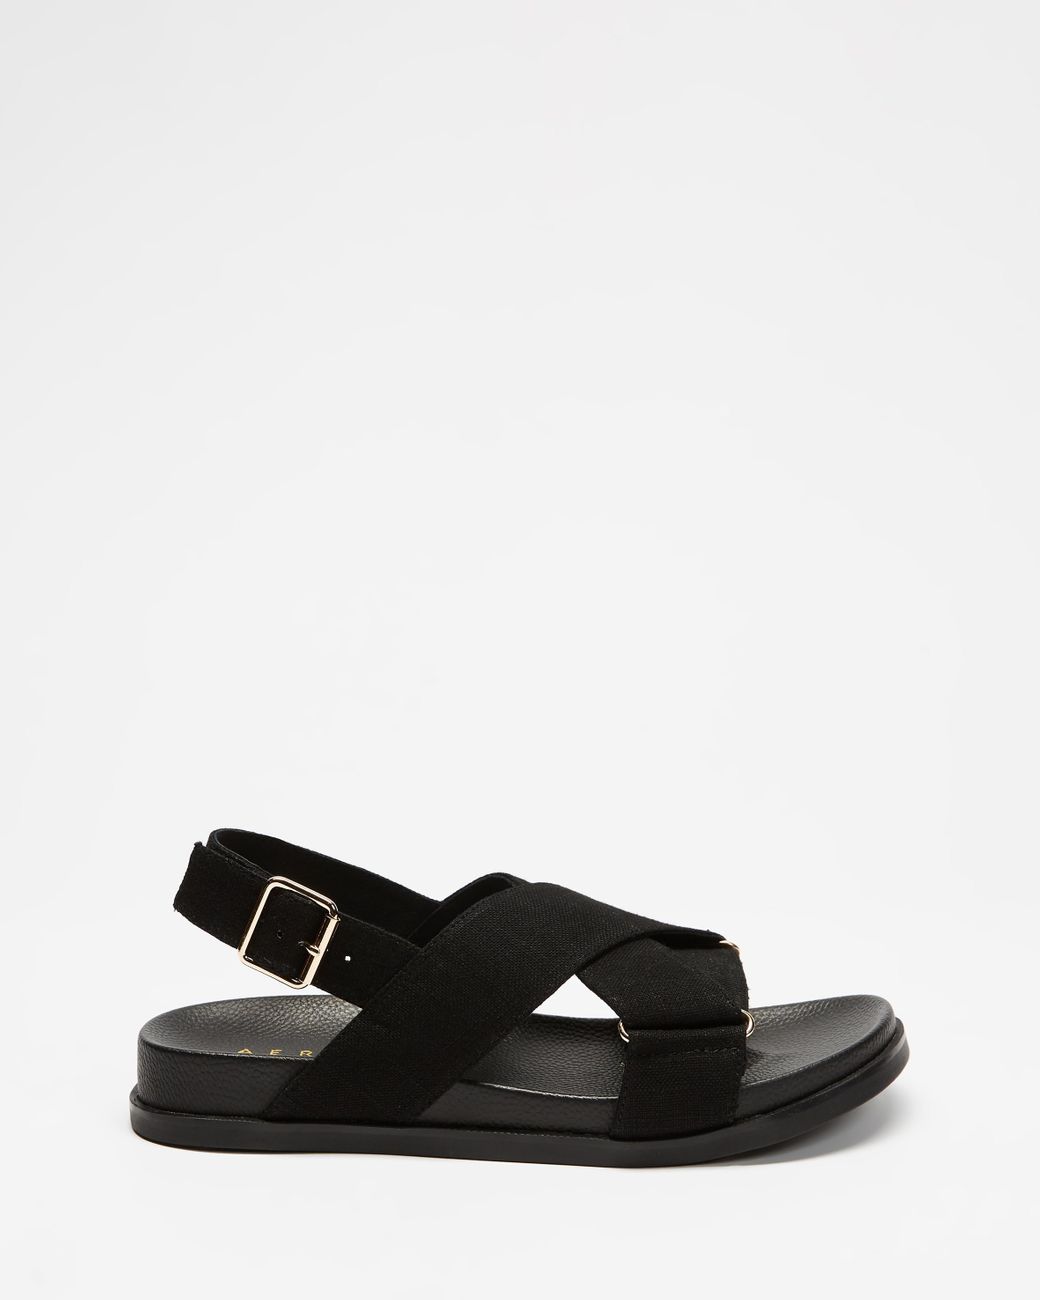 AERE Linen Crossover Footbed Sandals in Black | Lyst Australia